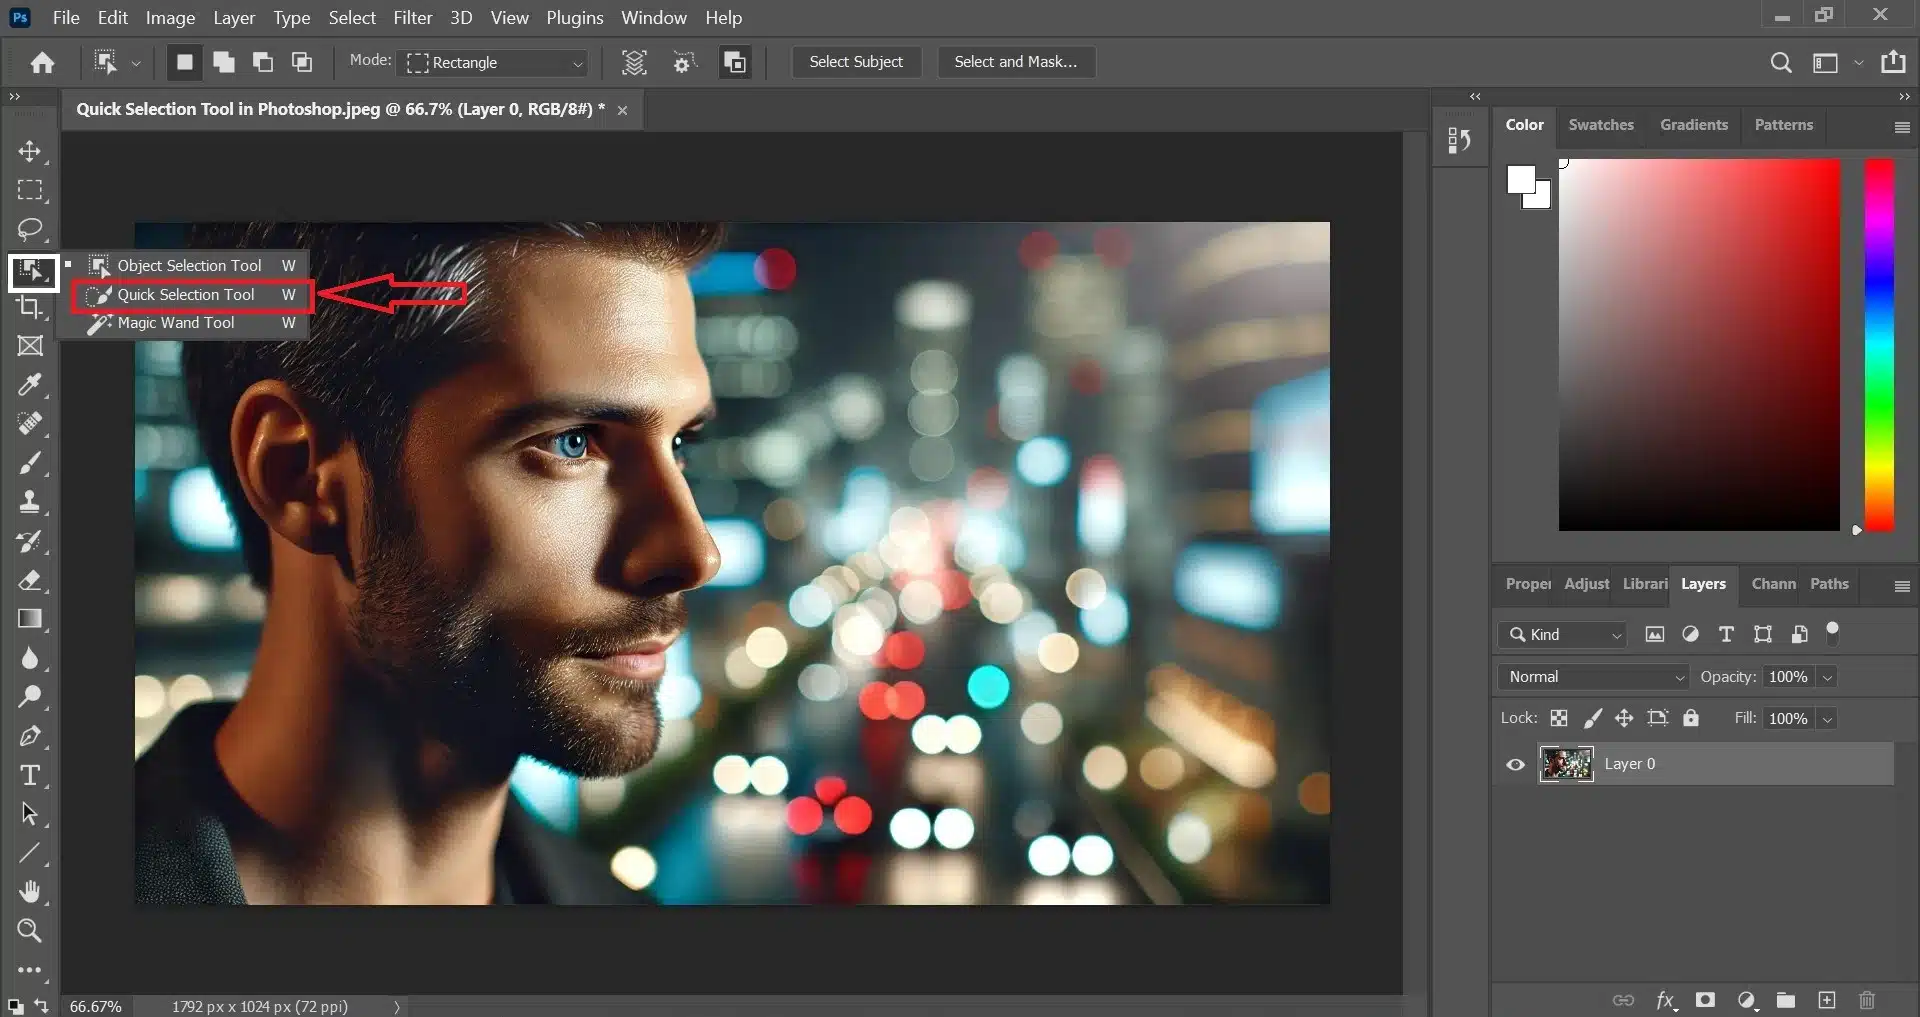 A screenshot of the Photoshop interface showing the Quick Selection Tool highlighted and a close-up image of a man's face with a city night background.